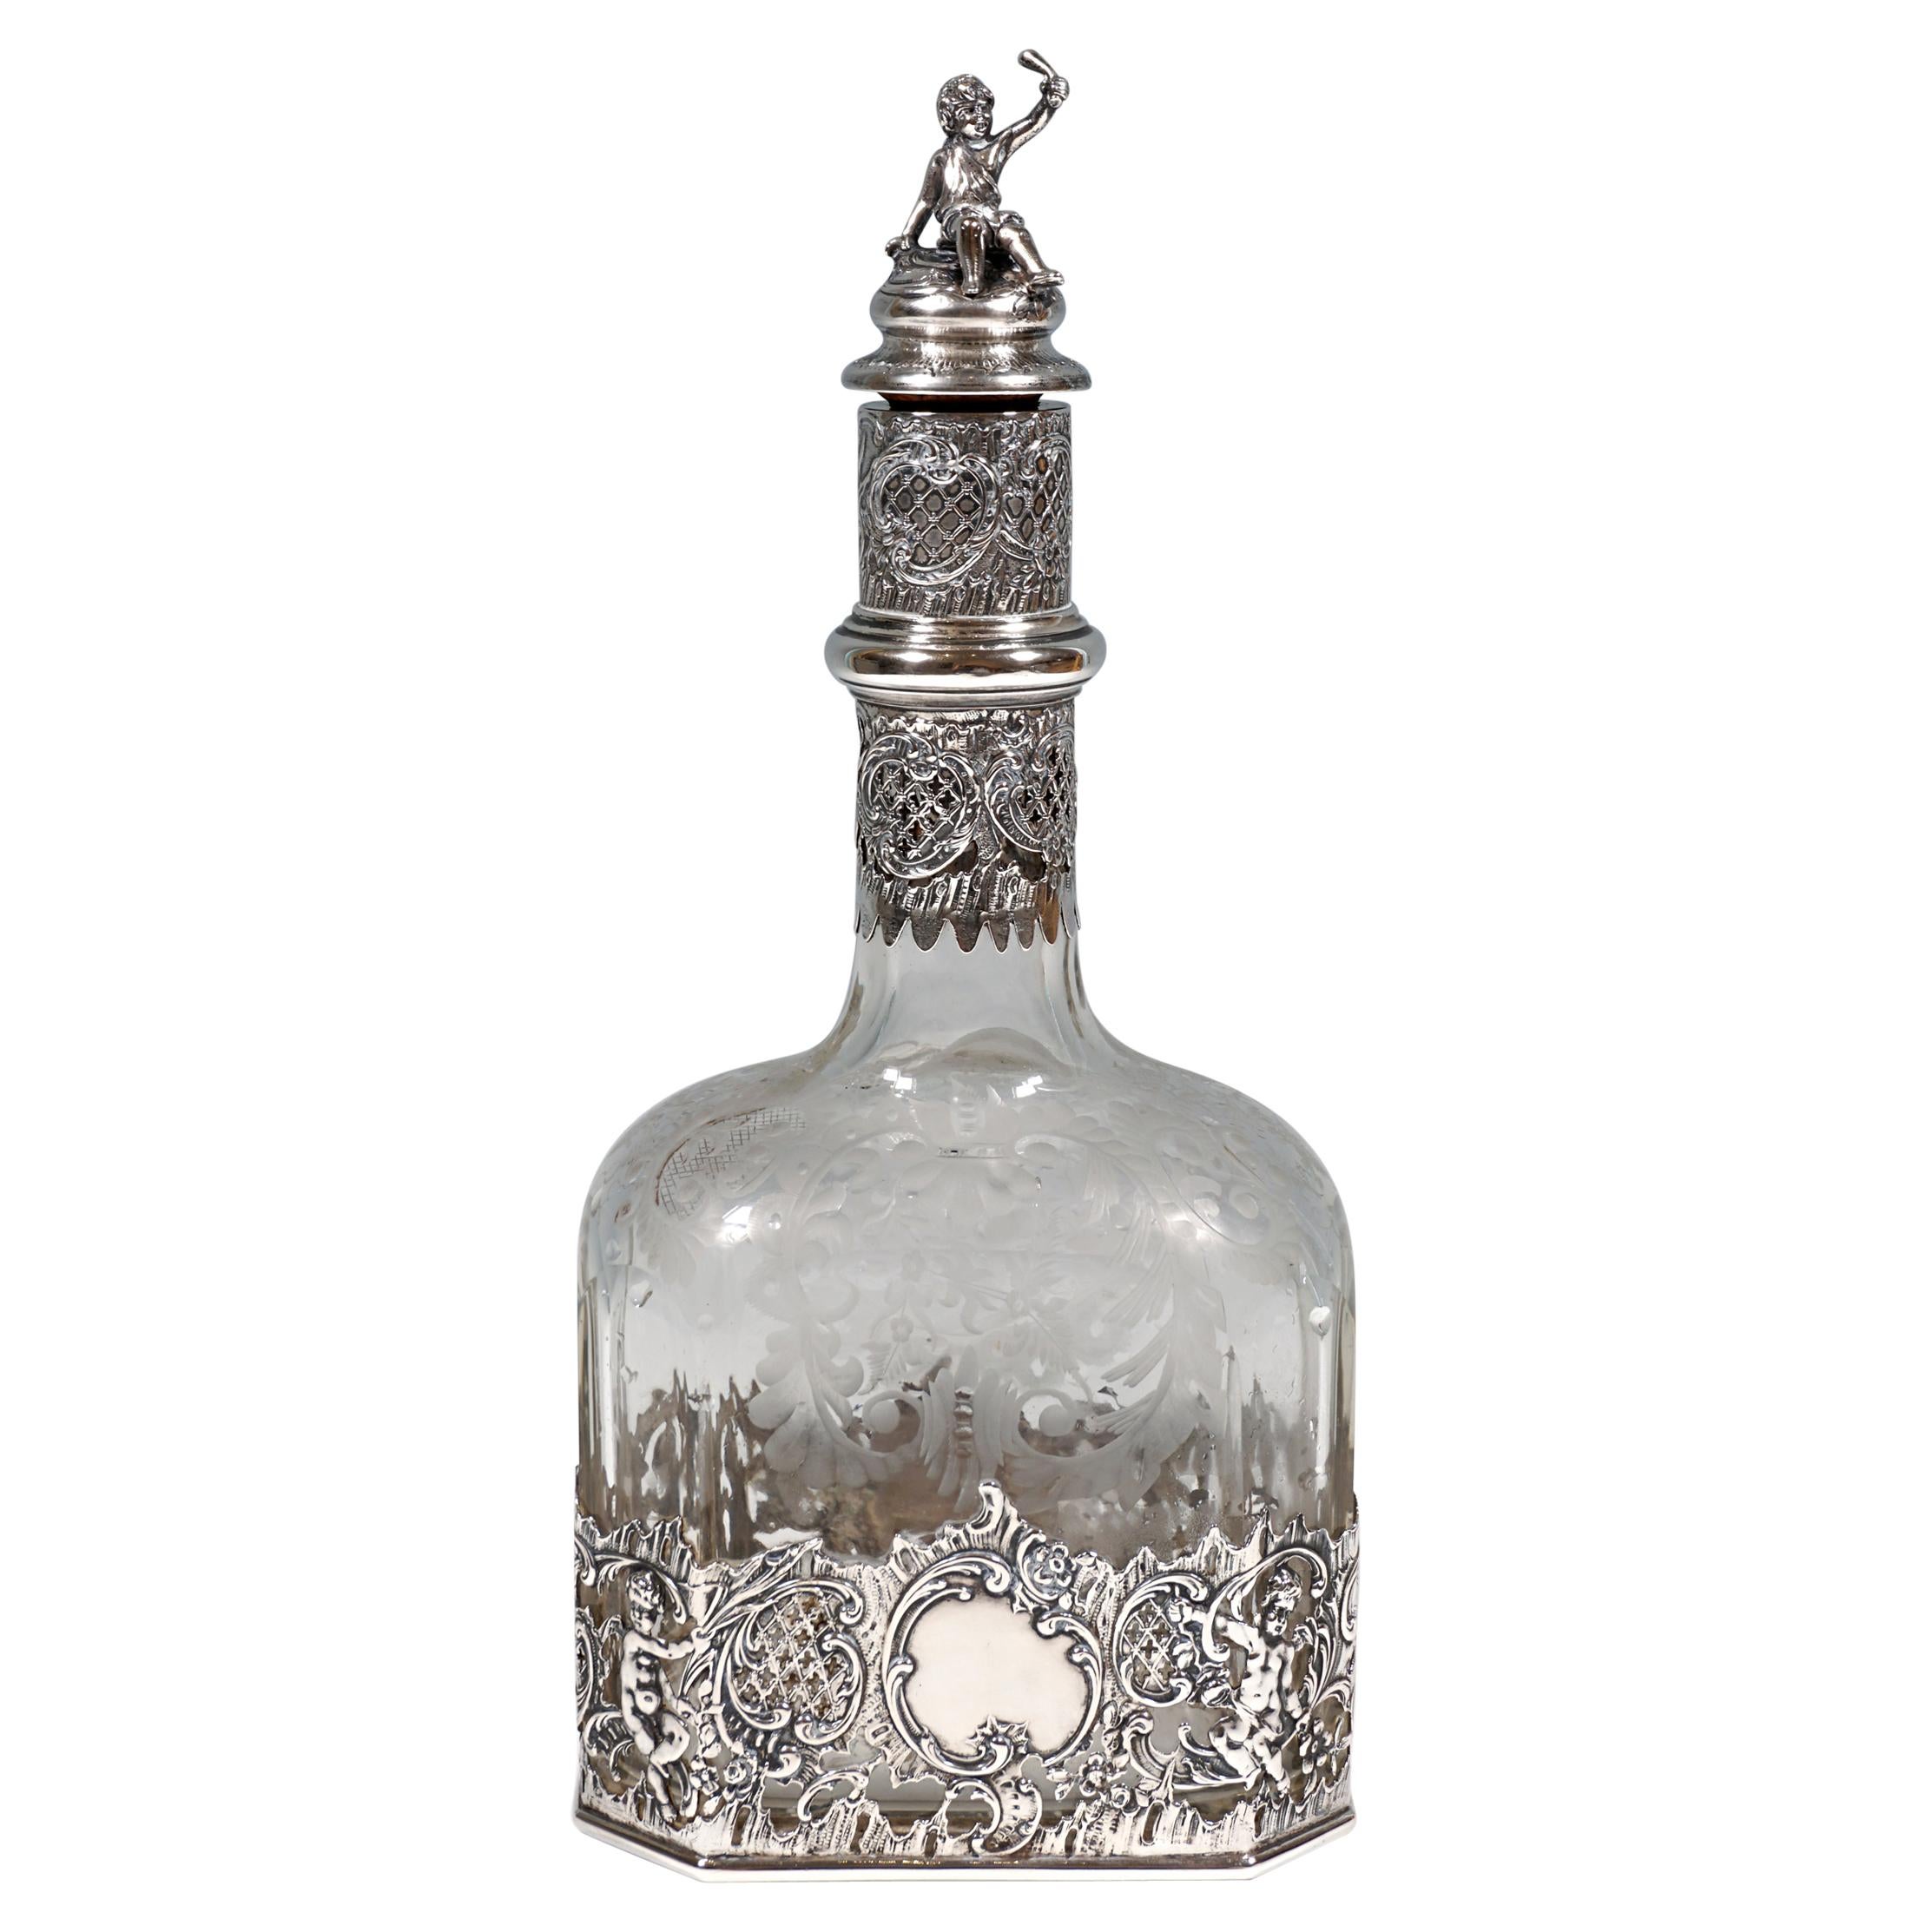 Antique Liquor Bottle with Rich Decoration and Silver Mount, France, around 1890